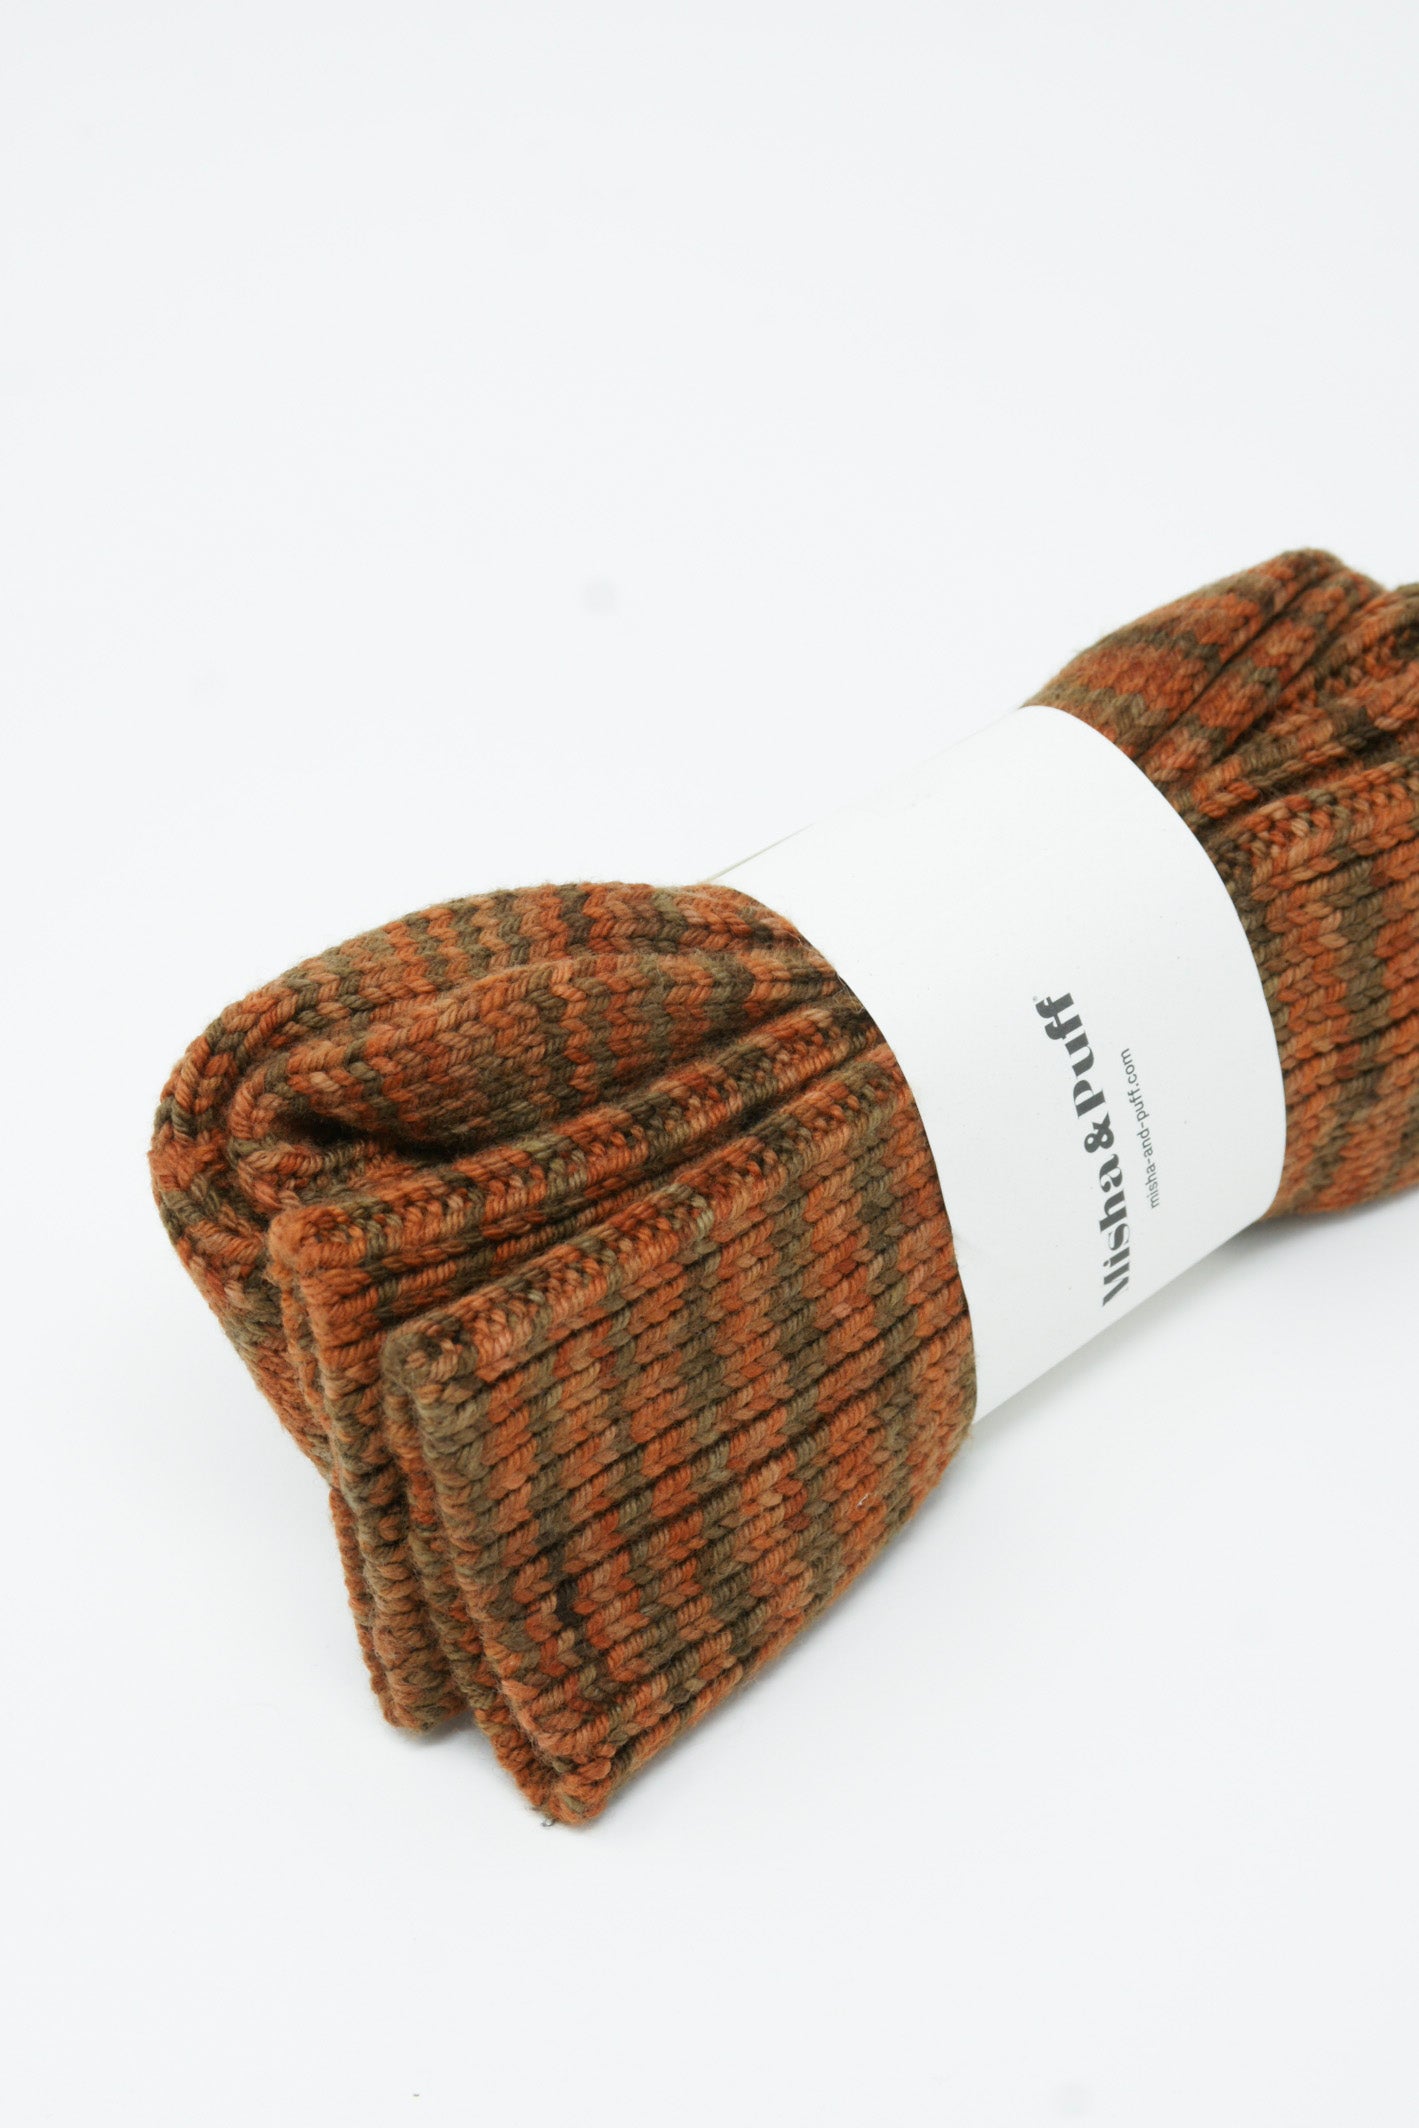 A pair of Misha & Puff Long Wool Socks in Gingerbread Space Dye, featuring a beautiful combination of brown and orange, lying on a crisp white surface.